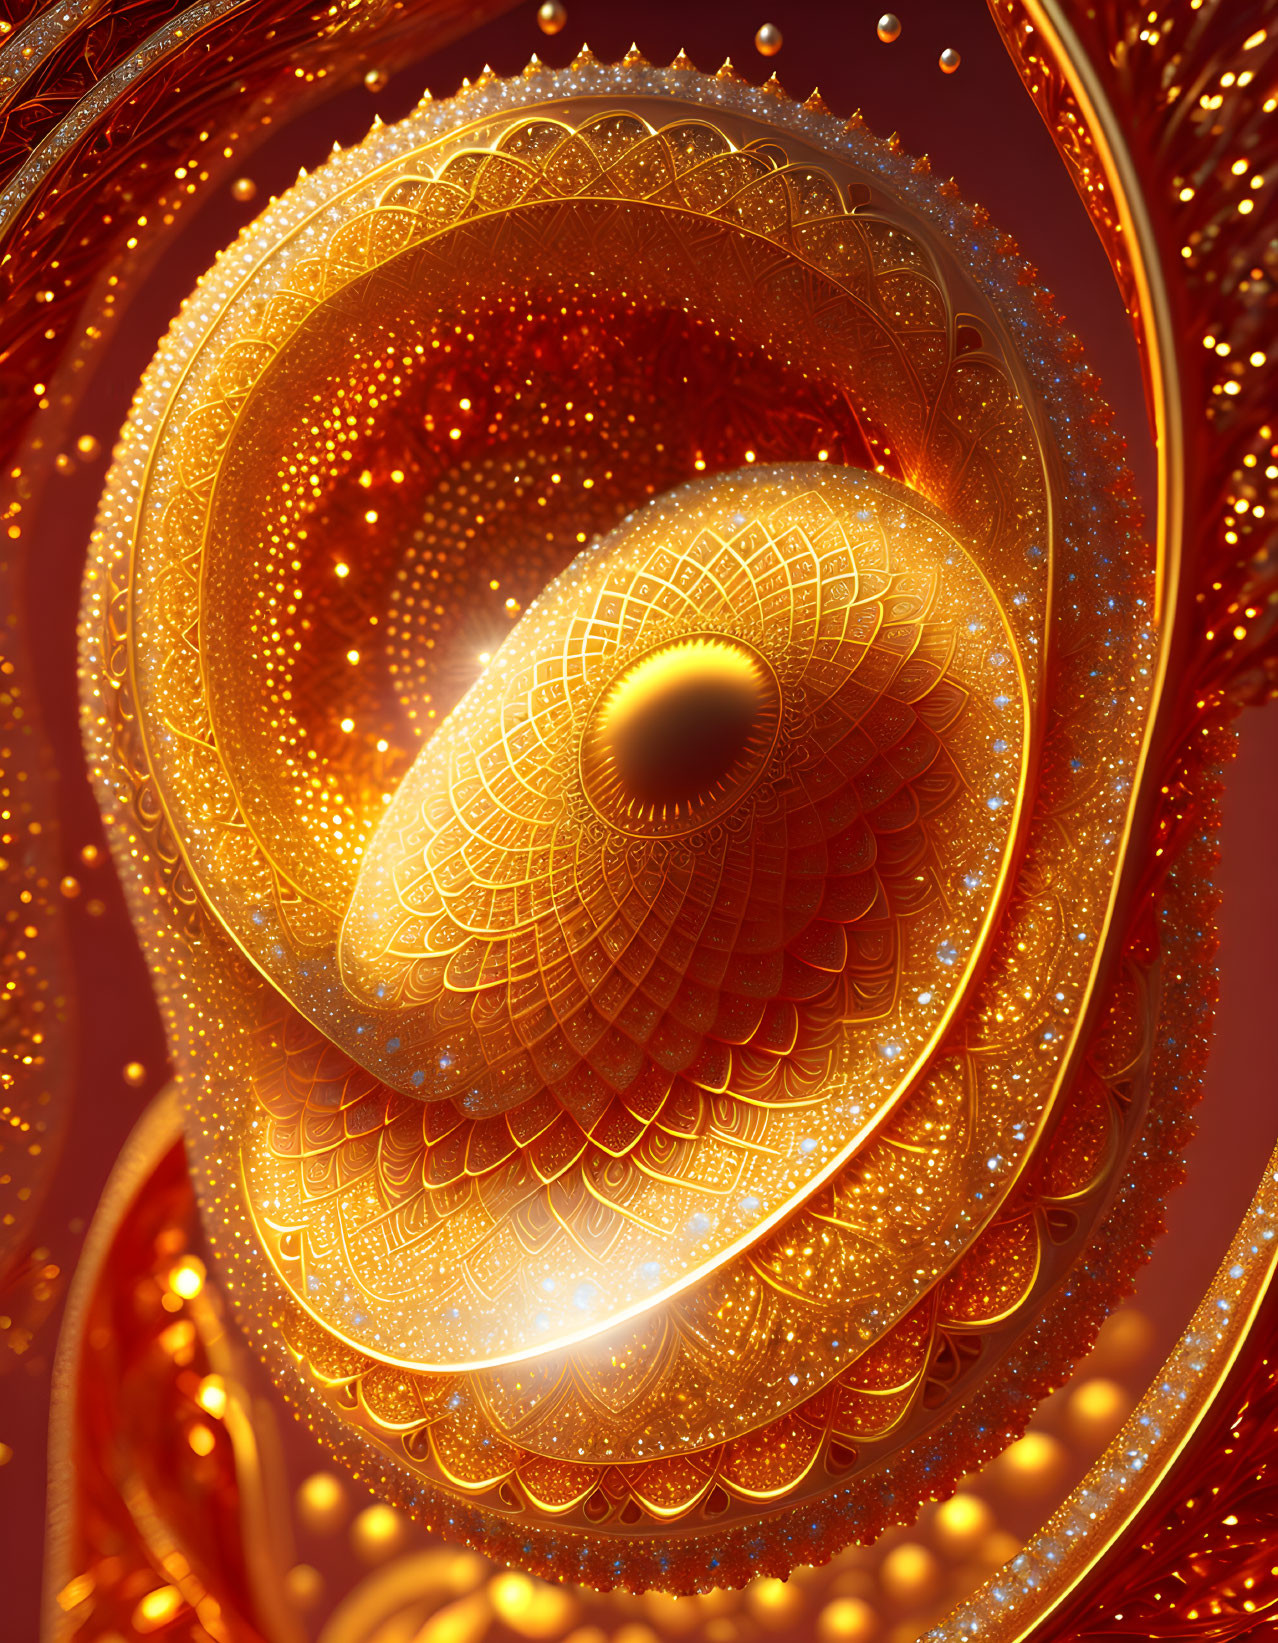 Intricate Golden Fractal Spiral with Ornate Patterns